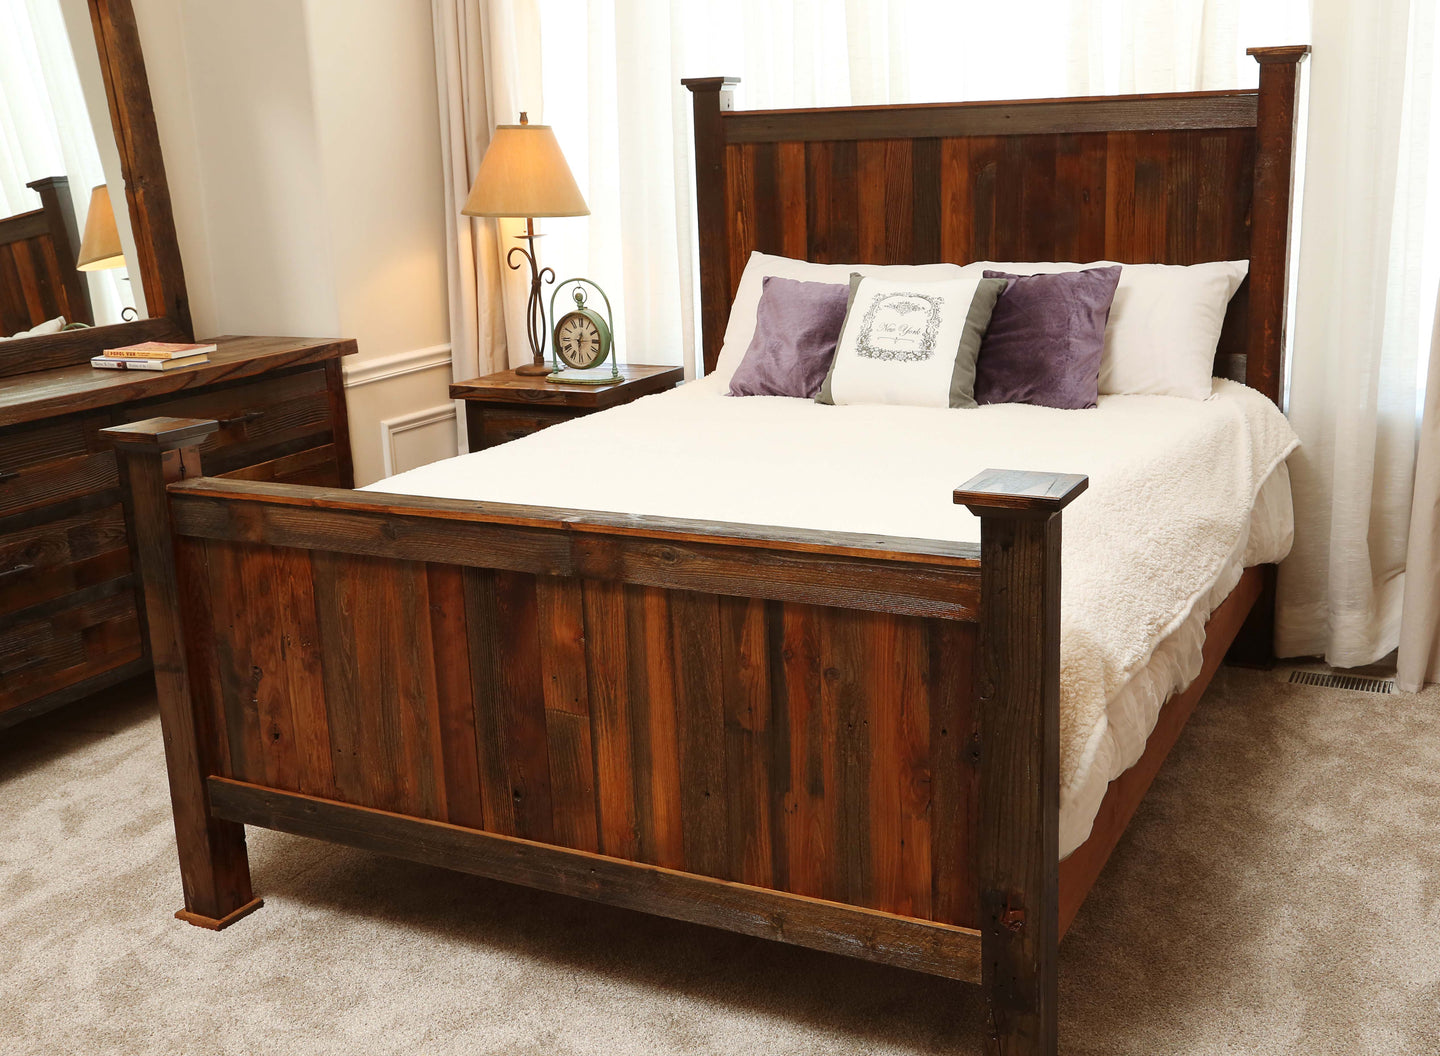 Gorgeous handcrafted solid wood modern rustic Barnwood bed. Made in the U.S.A. from re-claimed barn wood. Very classy and comfortable. Will go great in any bedroom or cabin setting.